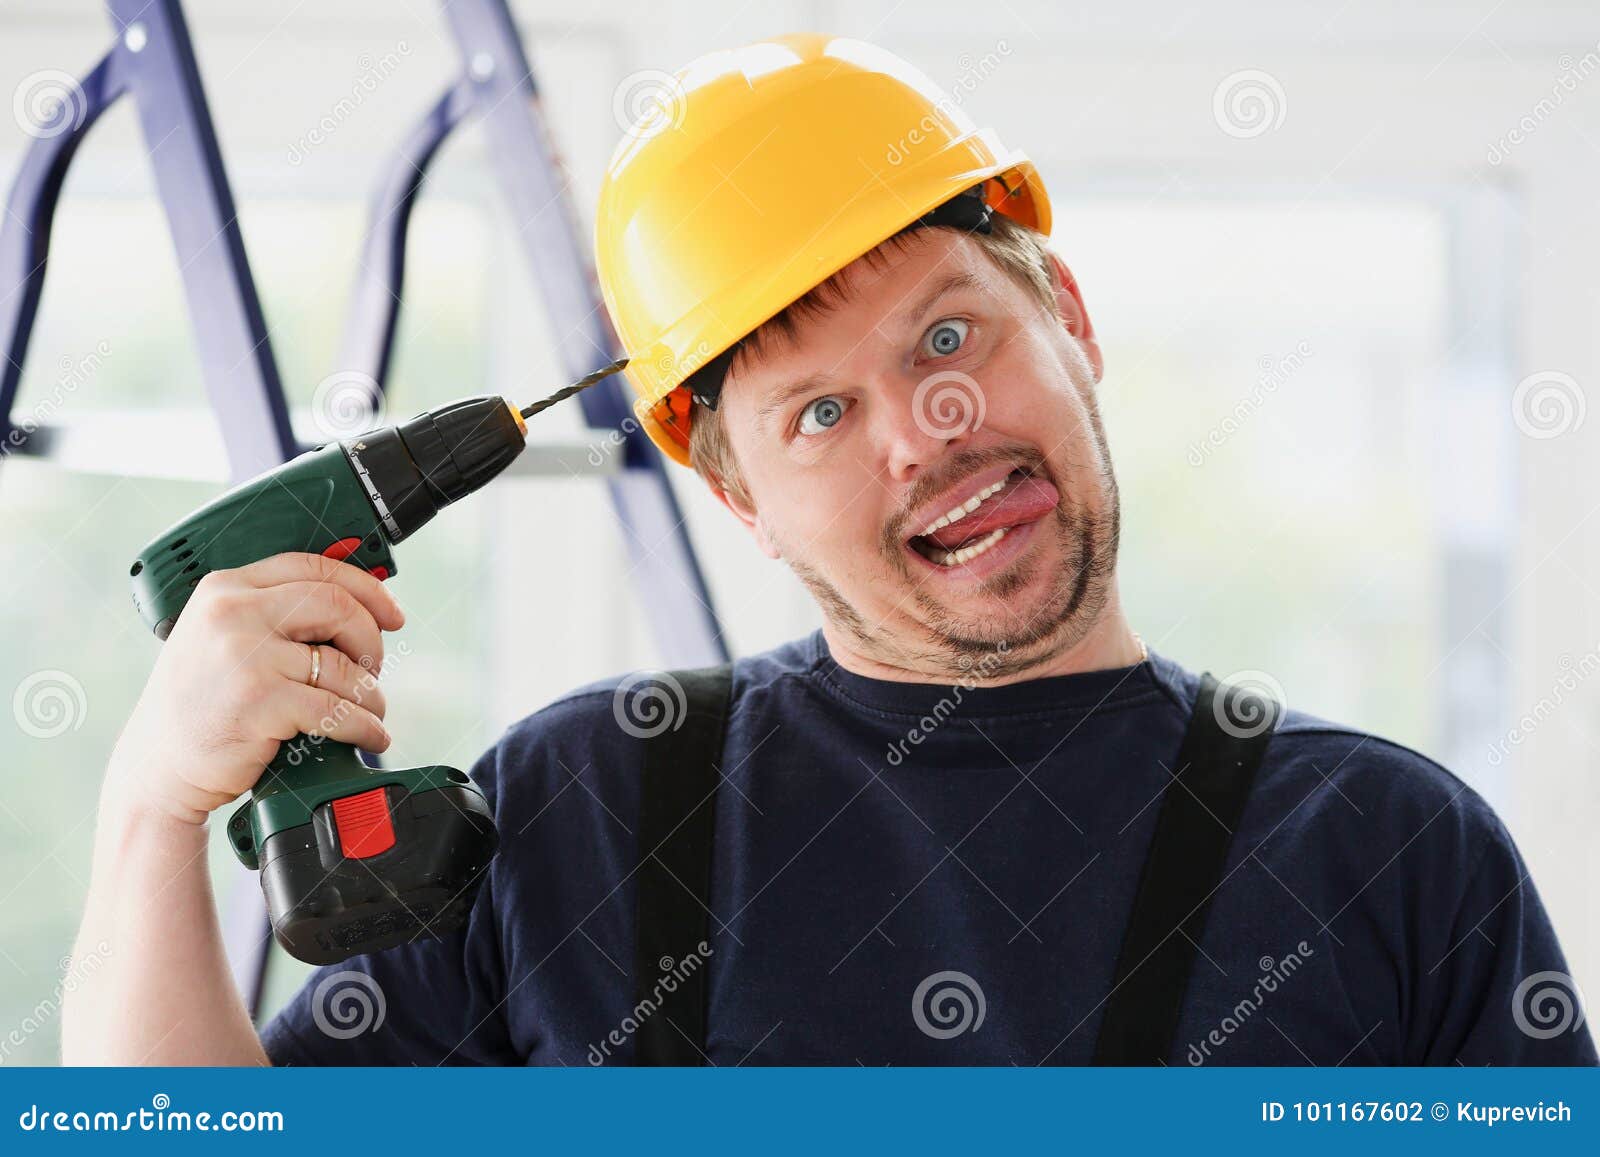 idiot worker using electric drill portrait